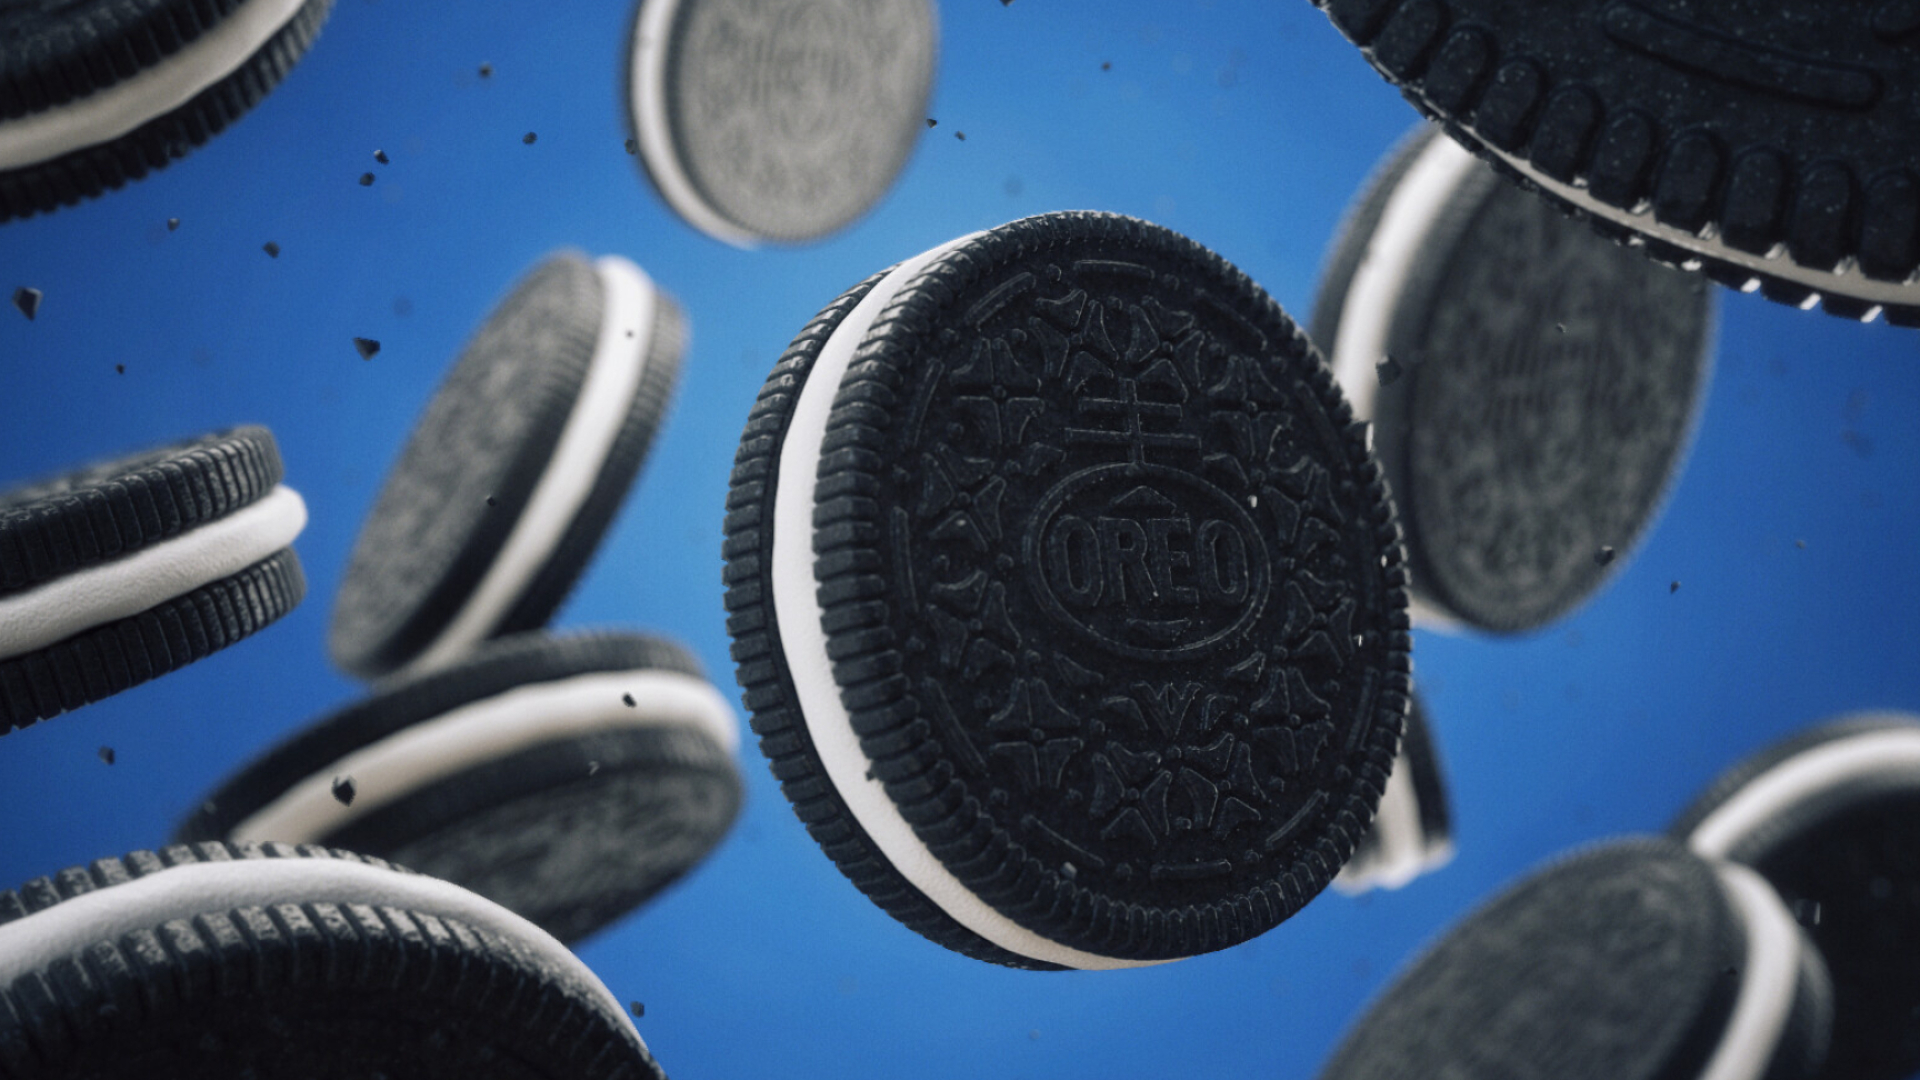 Oreo Cookies: America's favorite sandwich cookie for over 100 years. 1920x1080 Full HD Background.